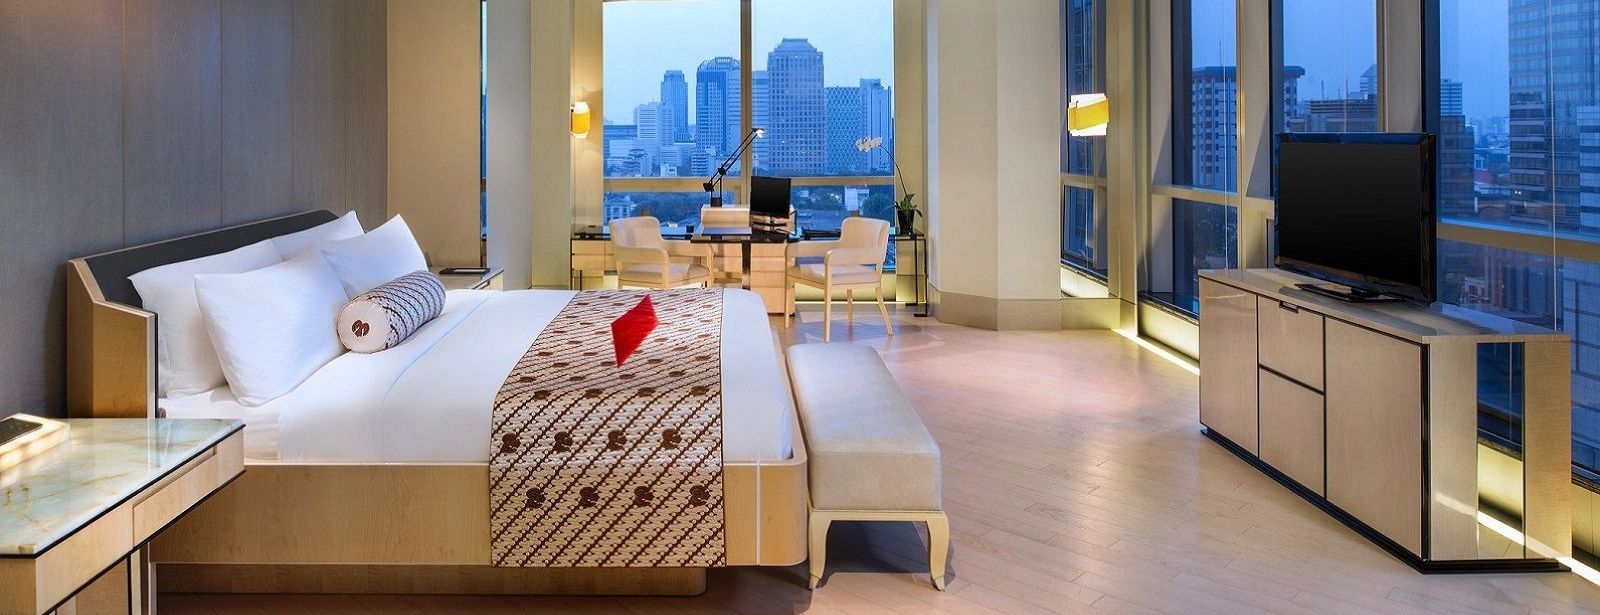 5 Hotels for Your Staycation in Jakarta
